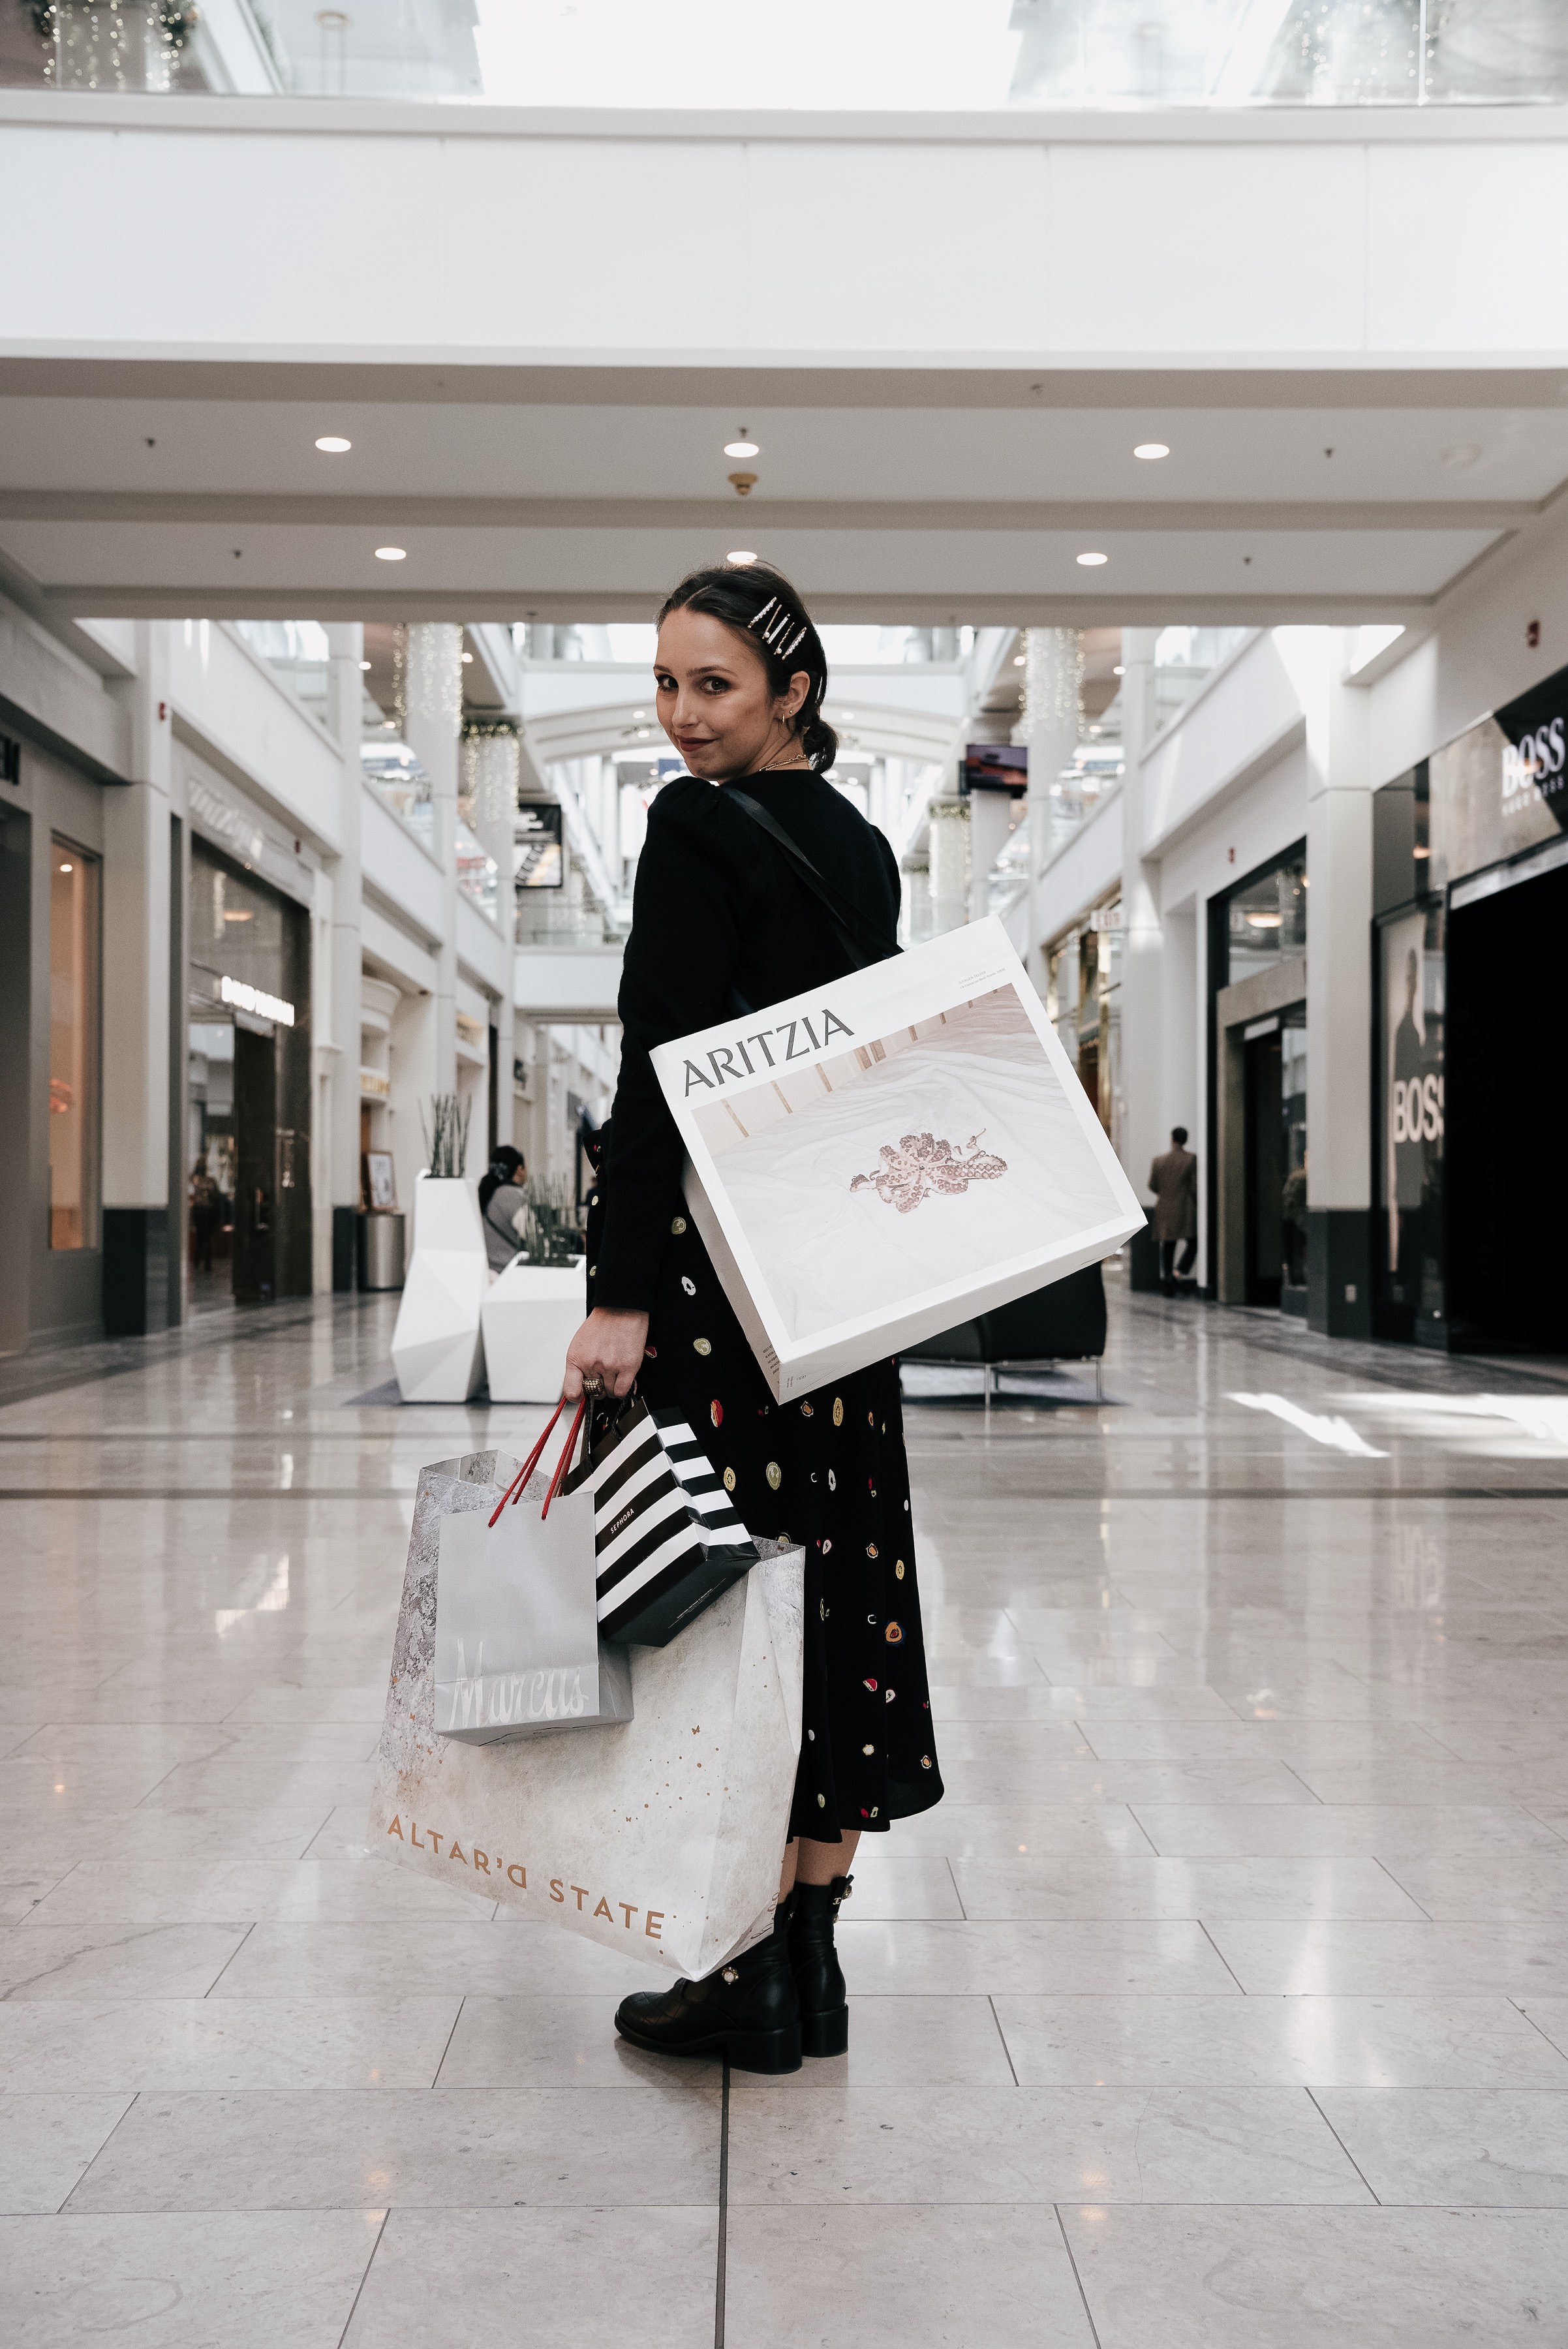 Holiday Shopping Edit: Found At The Westchester Mall-Shopping-Gifts-DVF-Blogger-WEstchester County-New York #westchester #fashion #fall #winter #holidayshopping #holidayoutfit #christmas #christimasshopping #shoppingbags #mall #newyork #newyorkblogger #bloggerstyle #winterstyle #winteroutfit 